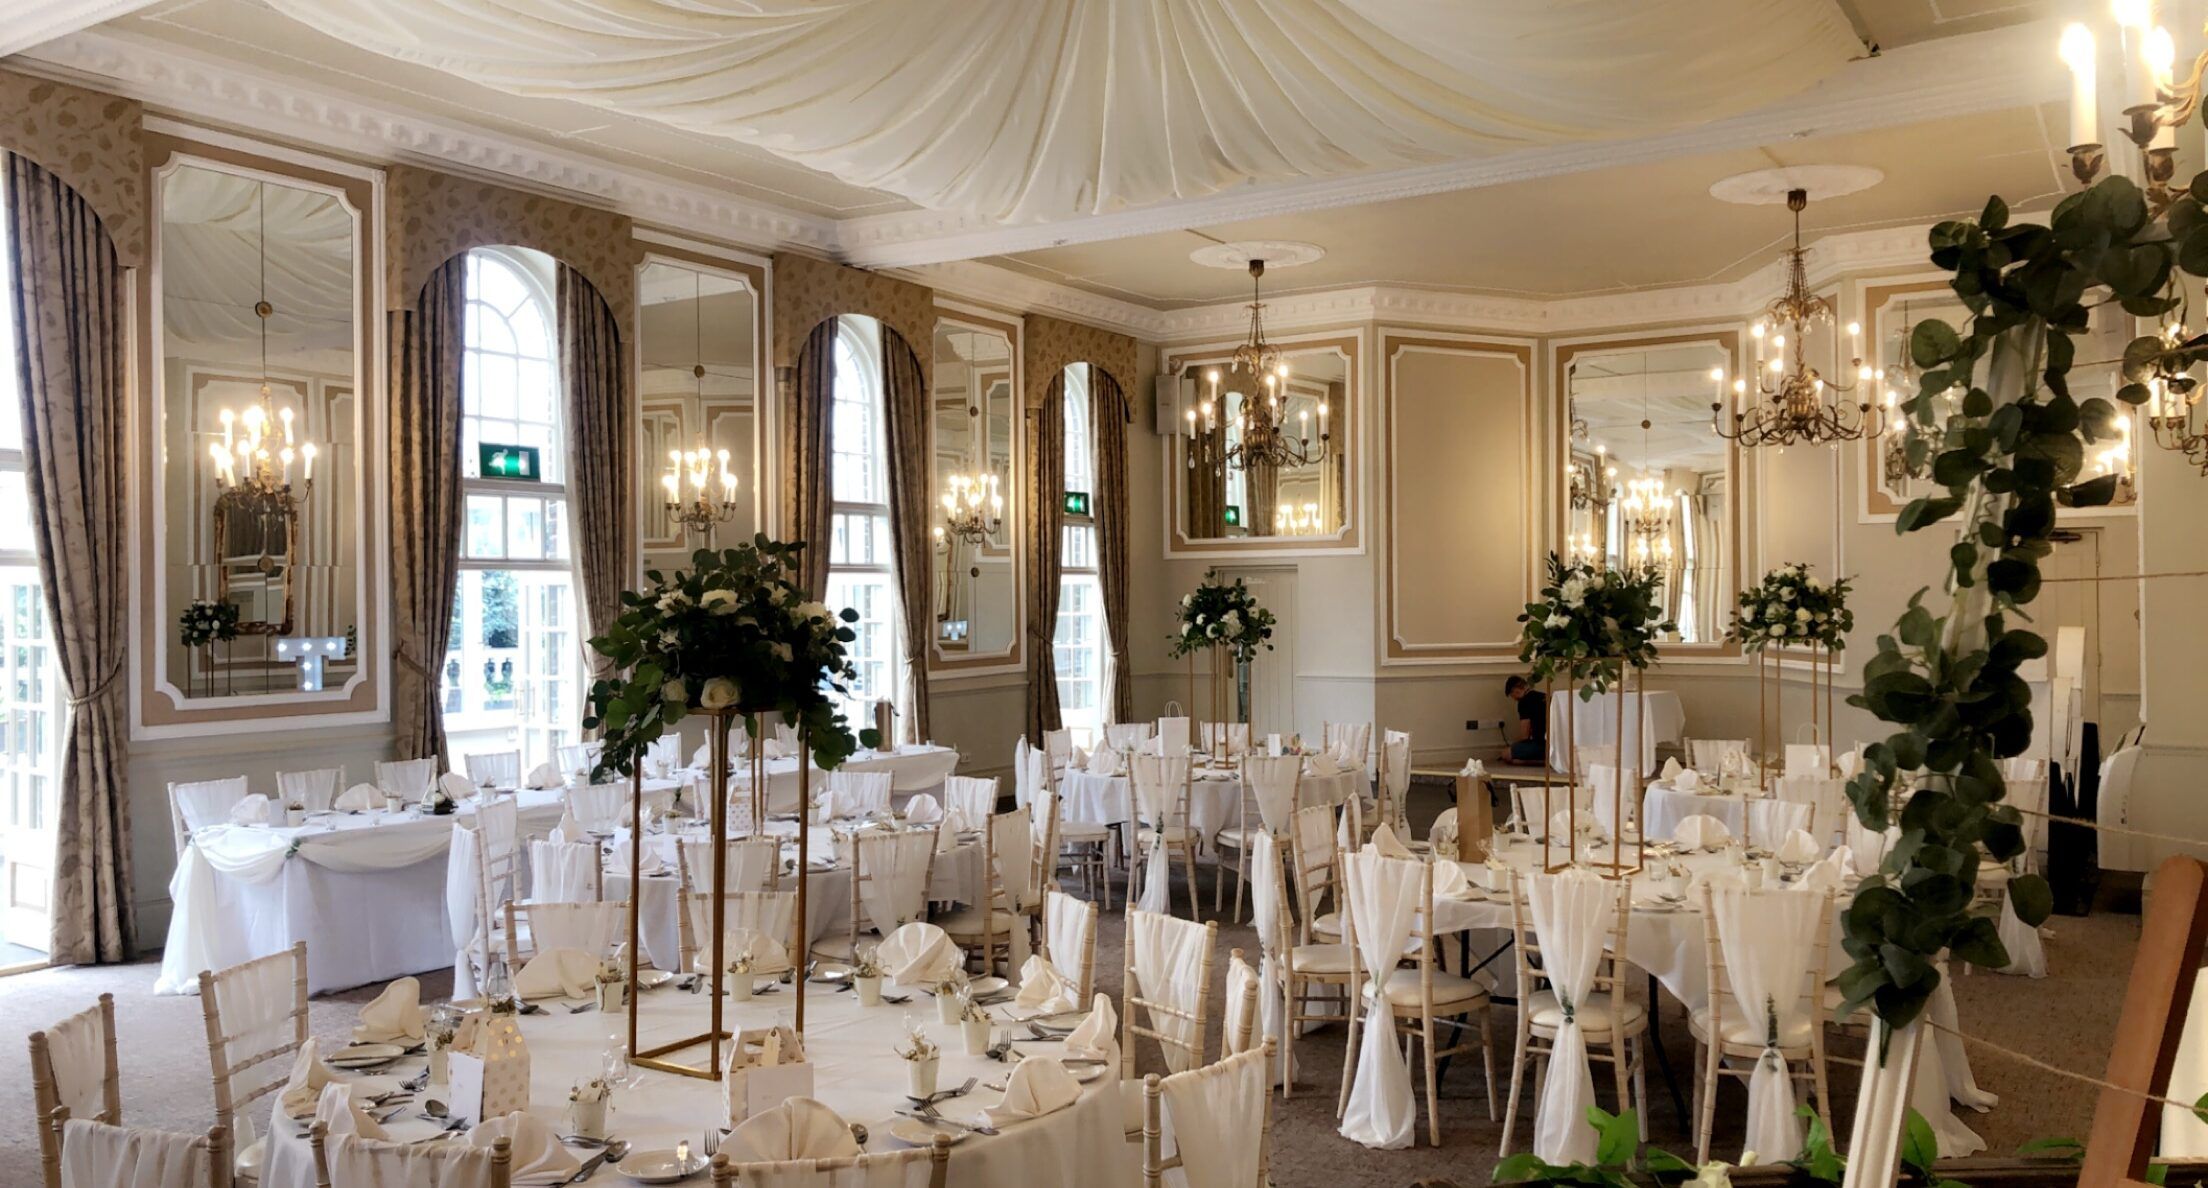 a room filled with lots of white tables and chairs.